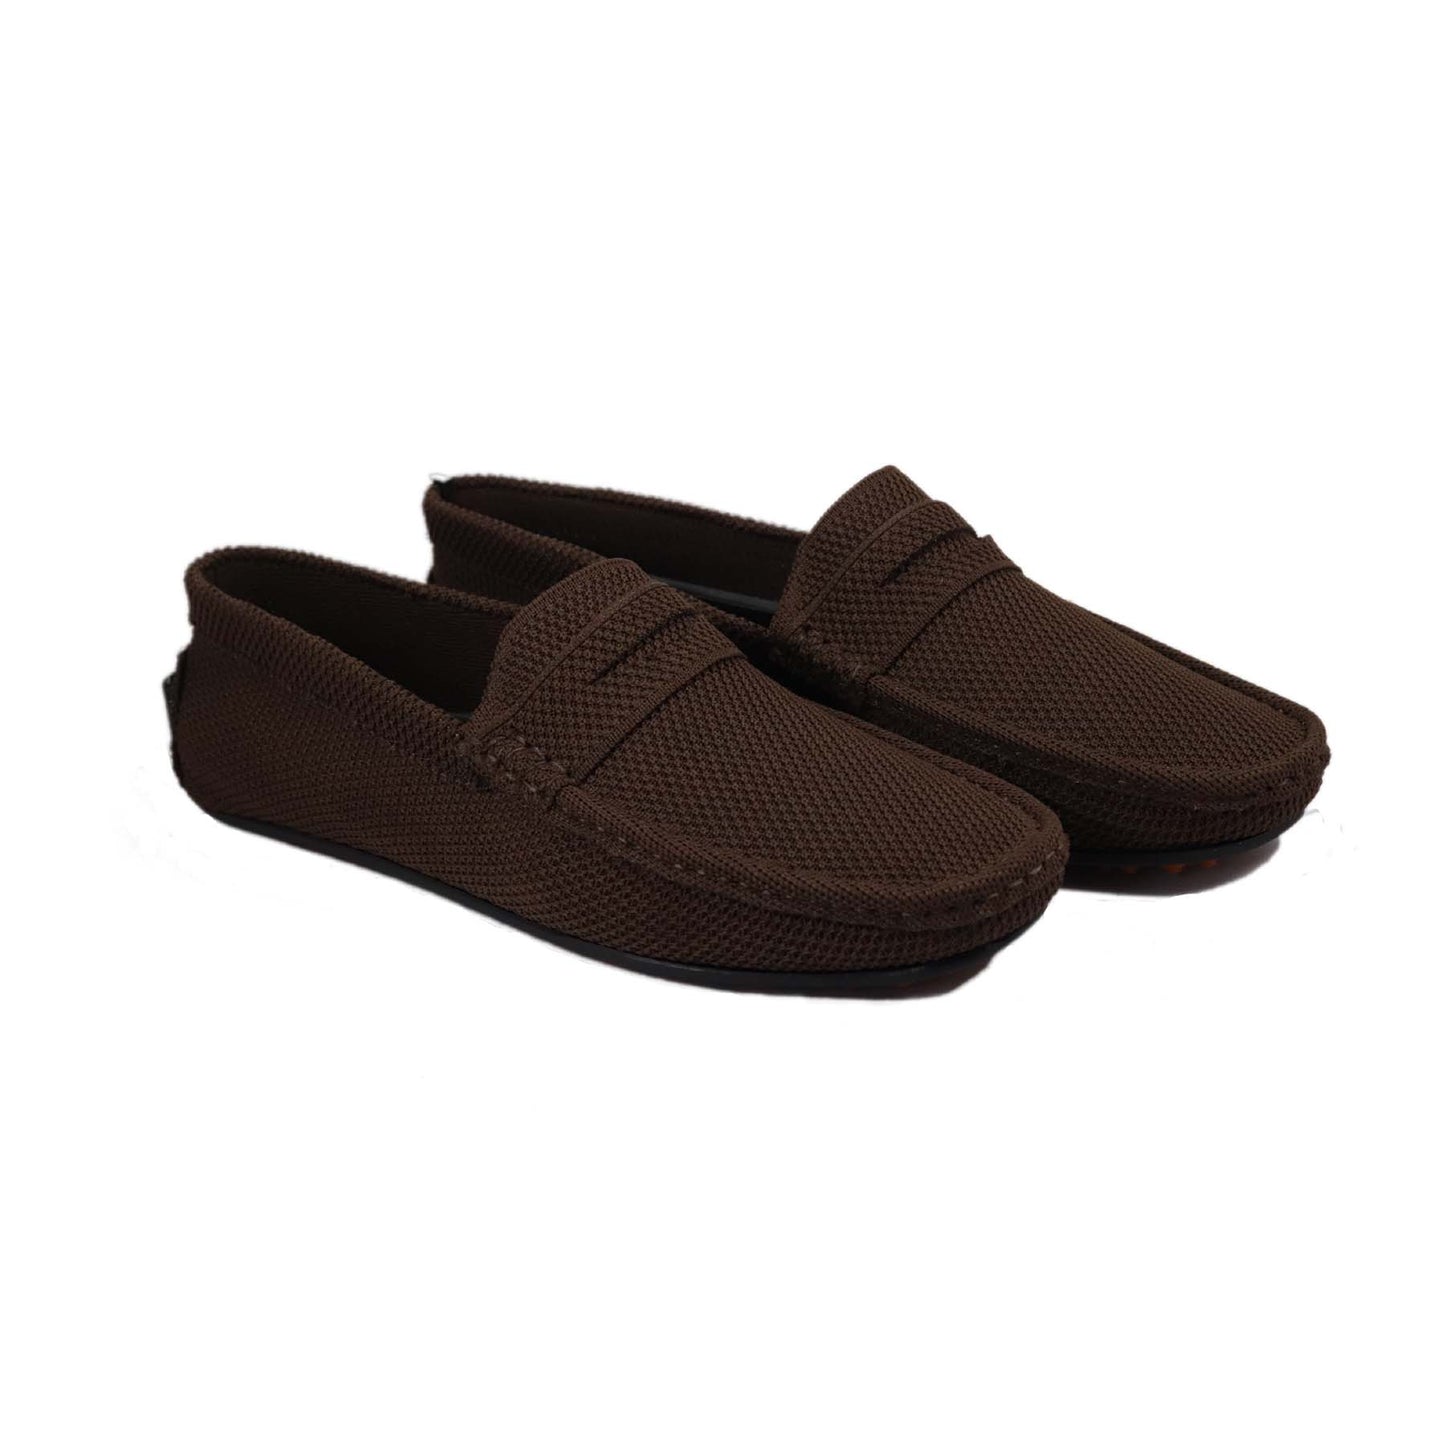 Men's Latest Casual Driving Loafers For All Season